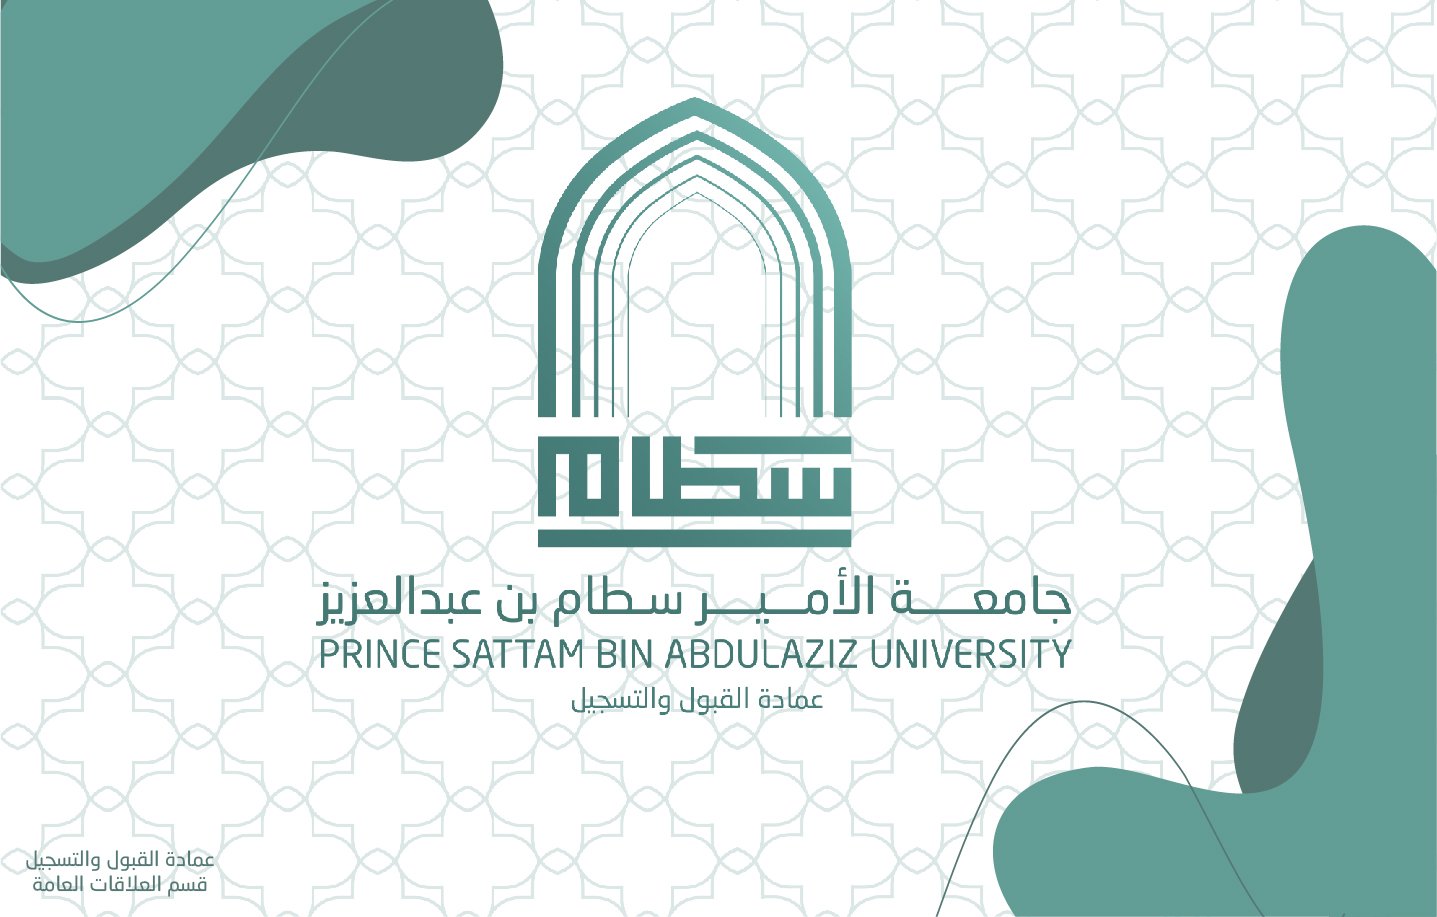 The opening of the medical specialty for female students at Prince Sattam bin Abdulaziz University